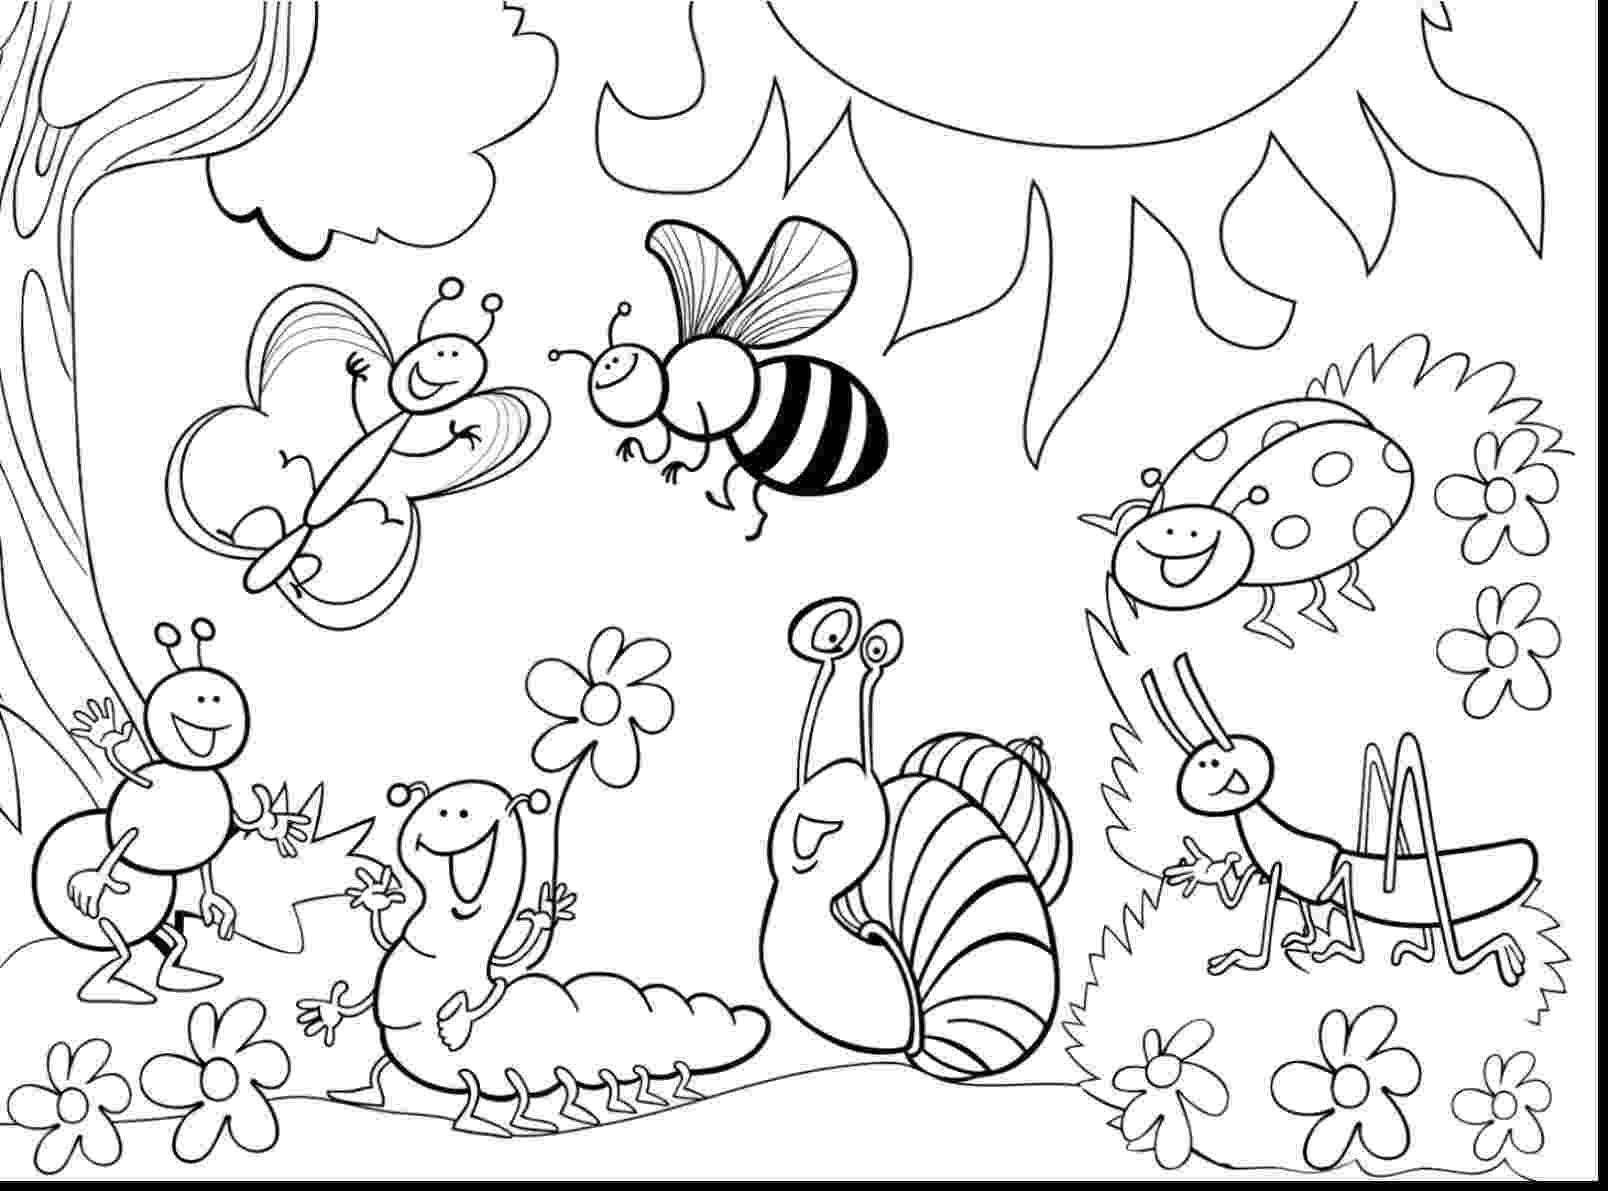 bug coloring page printable bug coloring pages for kids cool2bkids bug page coloring 1 1